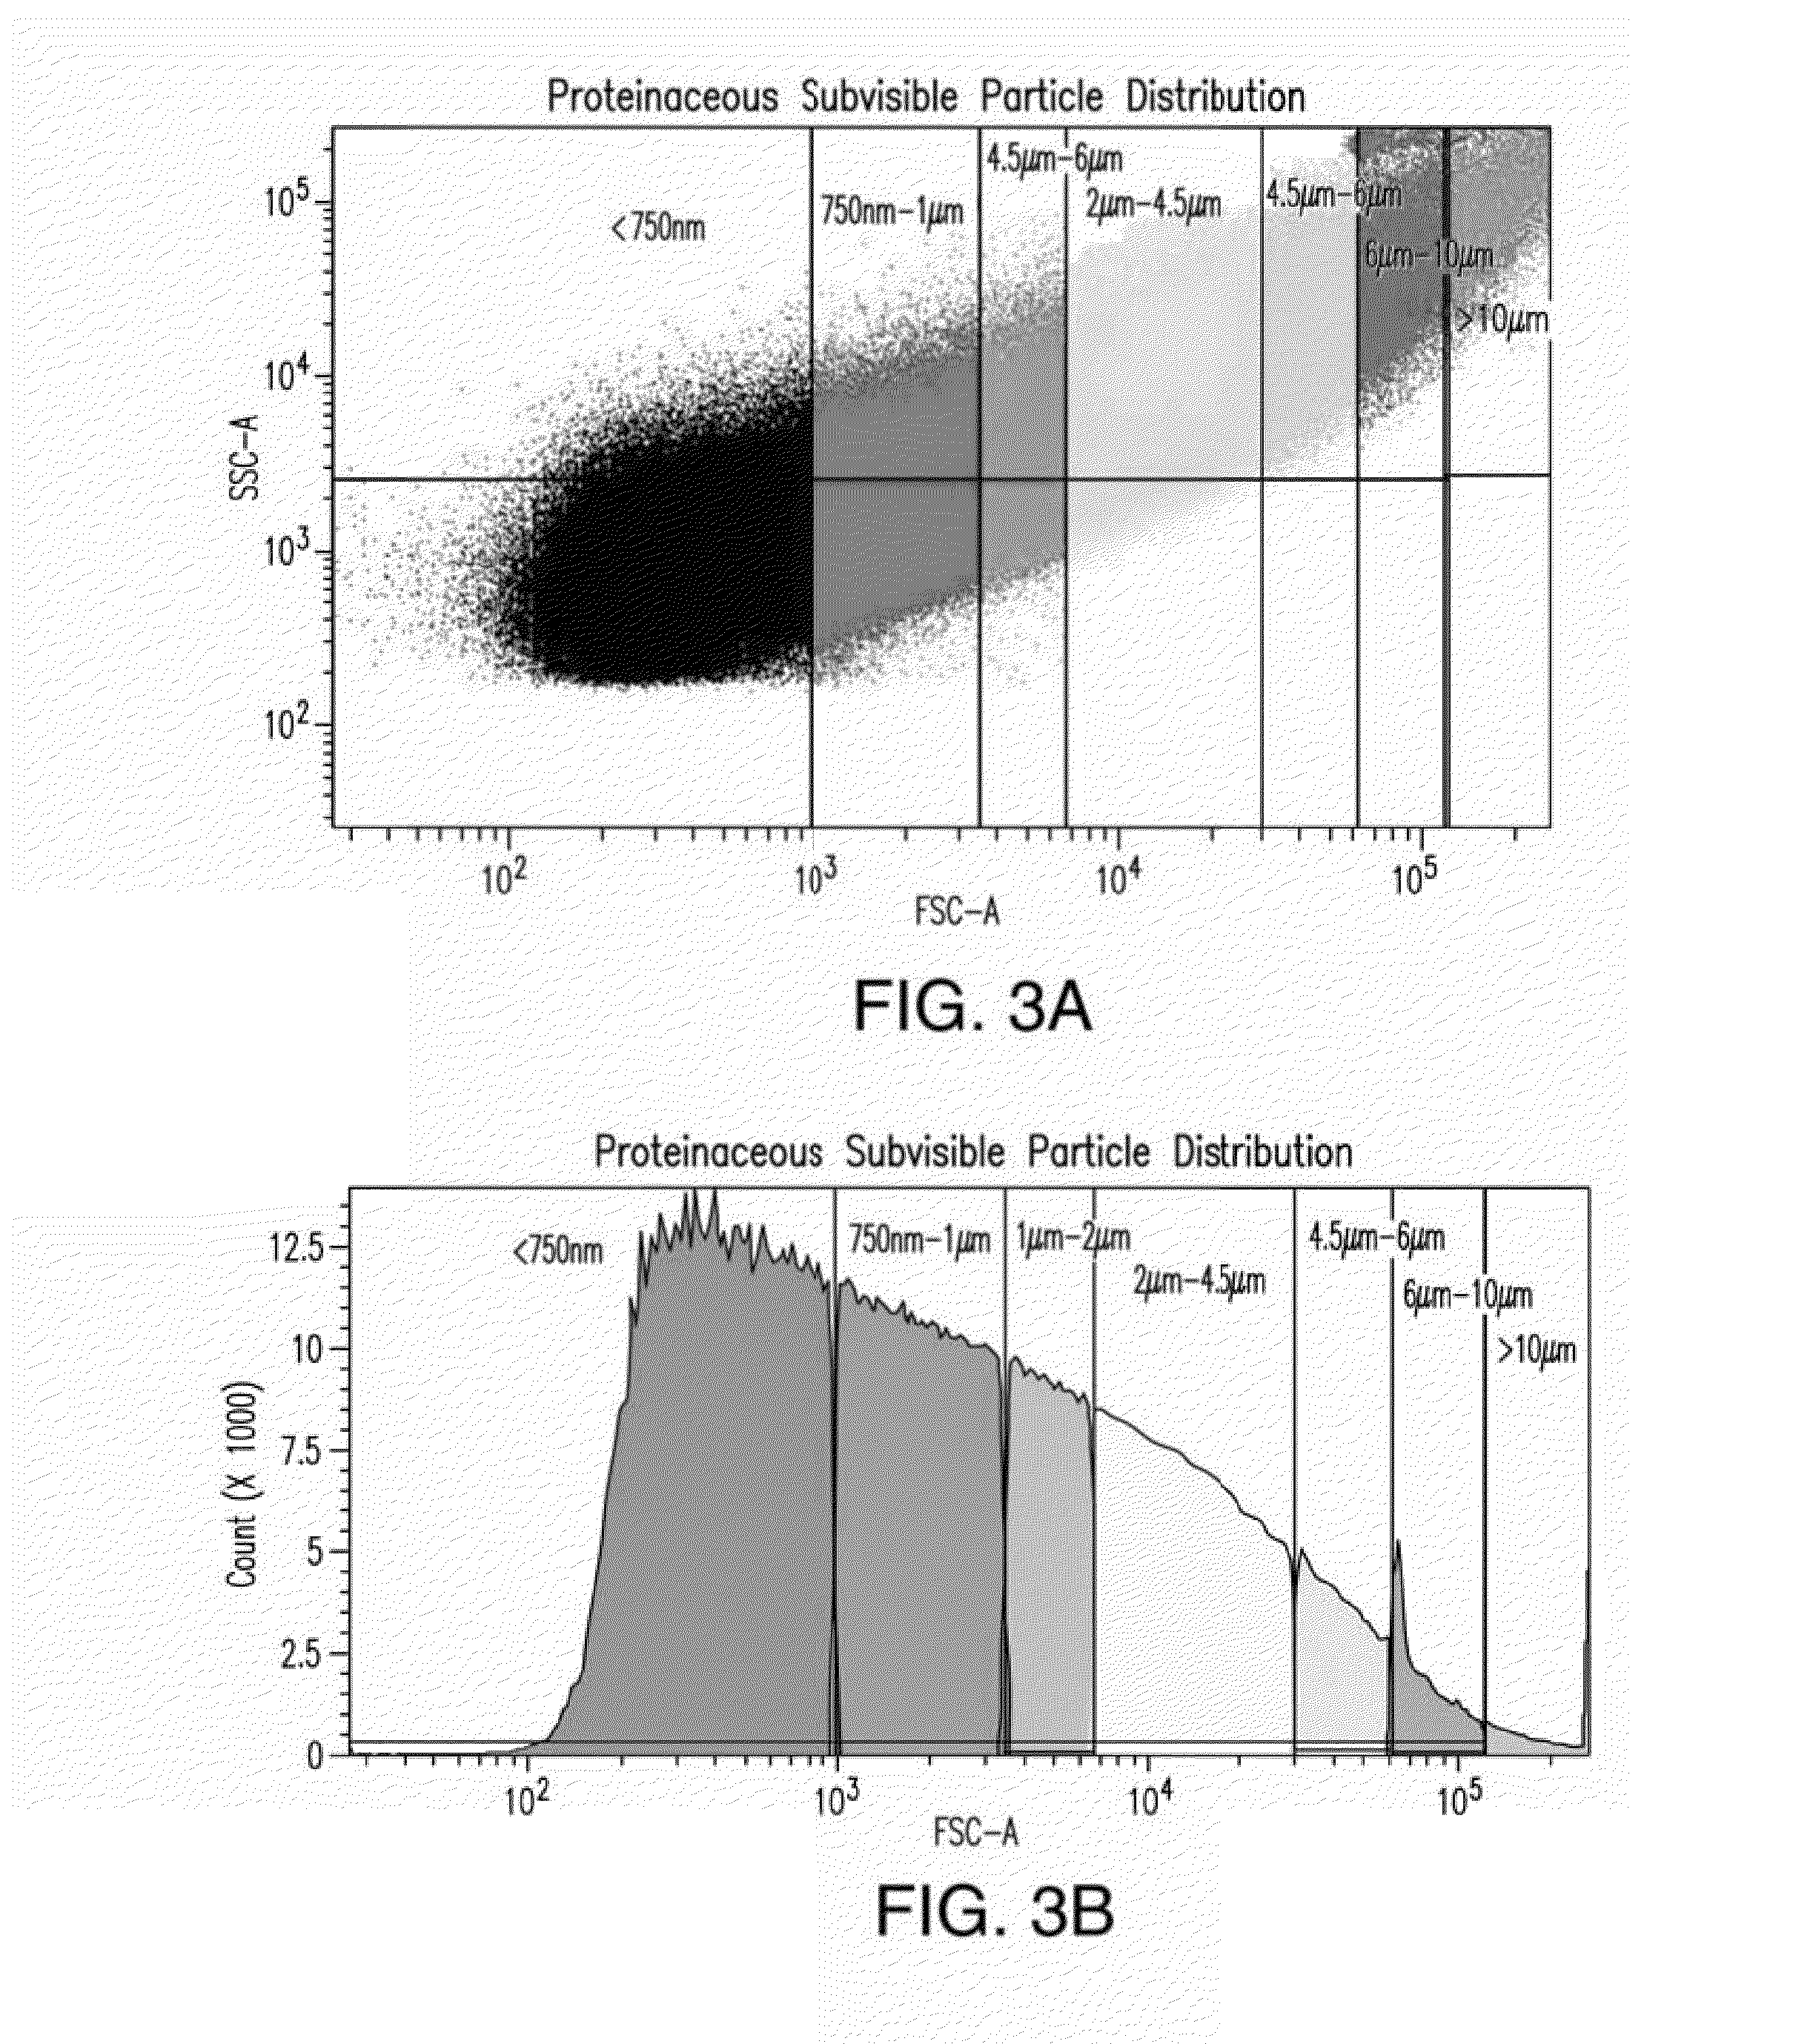 Characterization of Subvisible Particles Using a Particle Analyzer